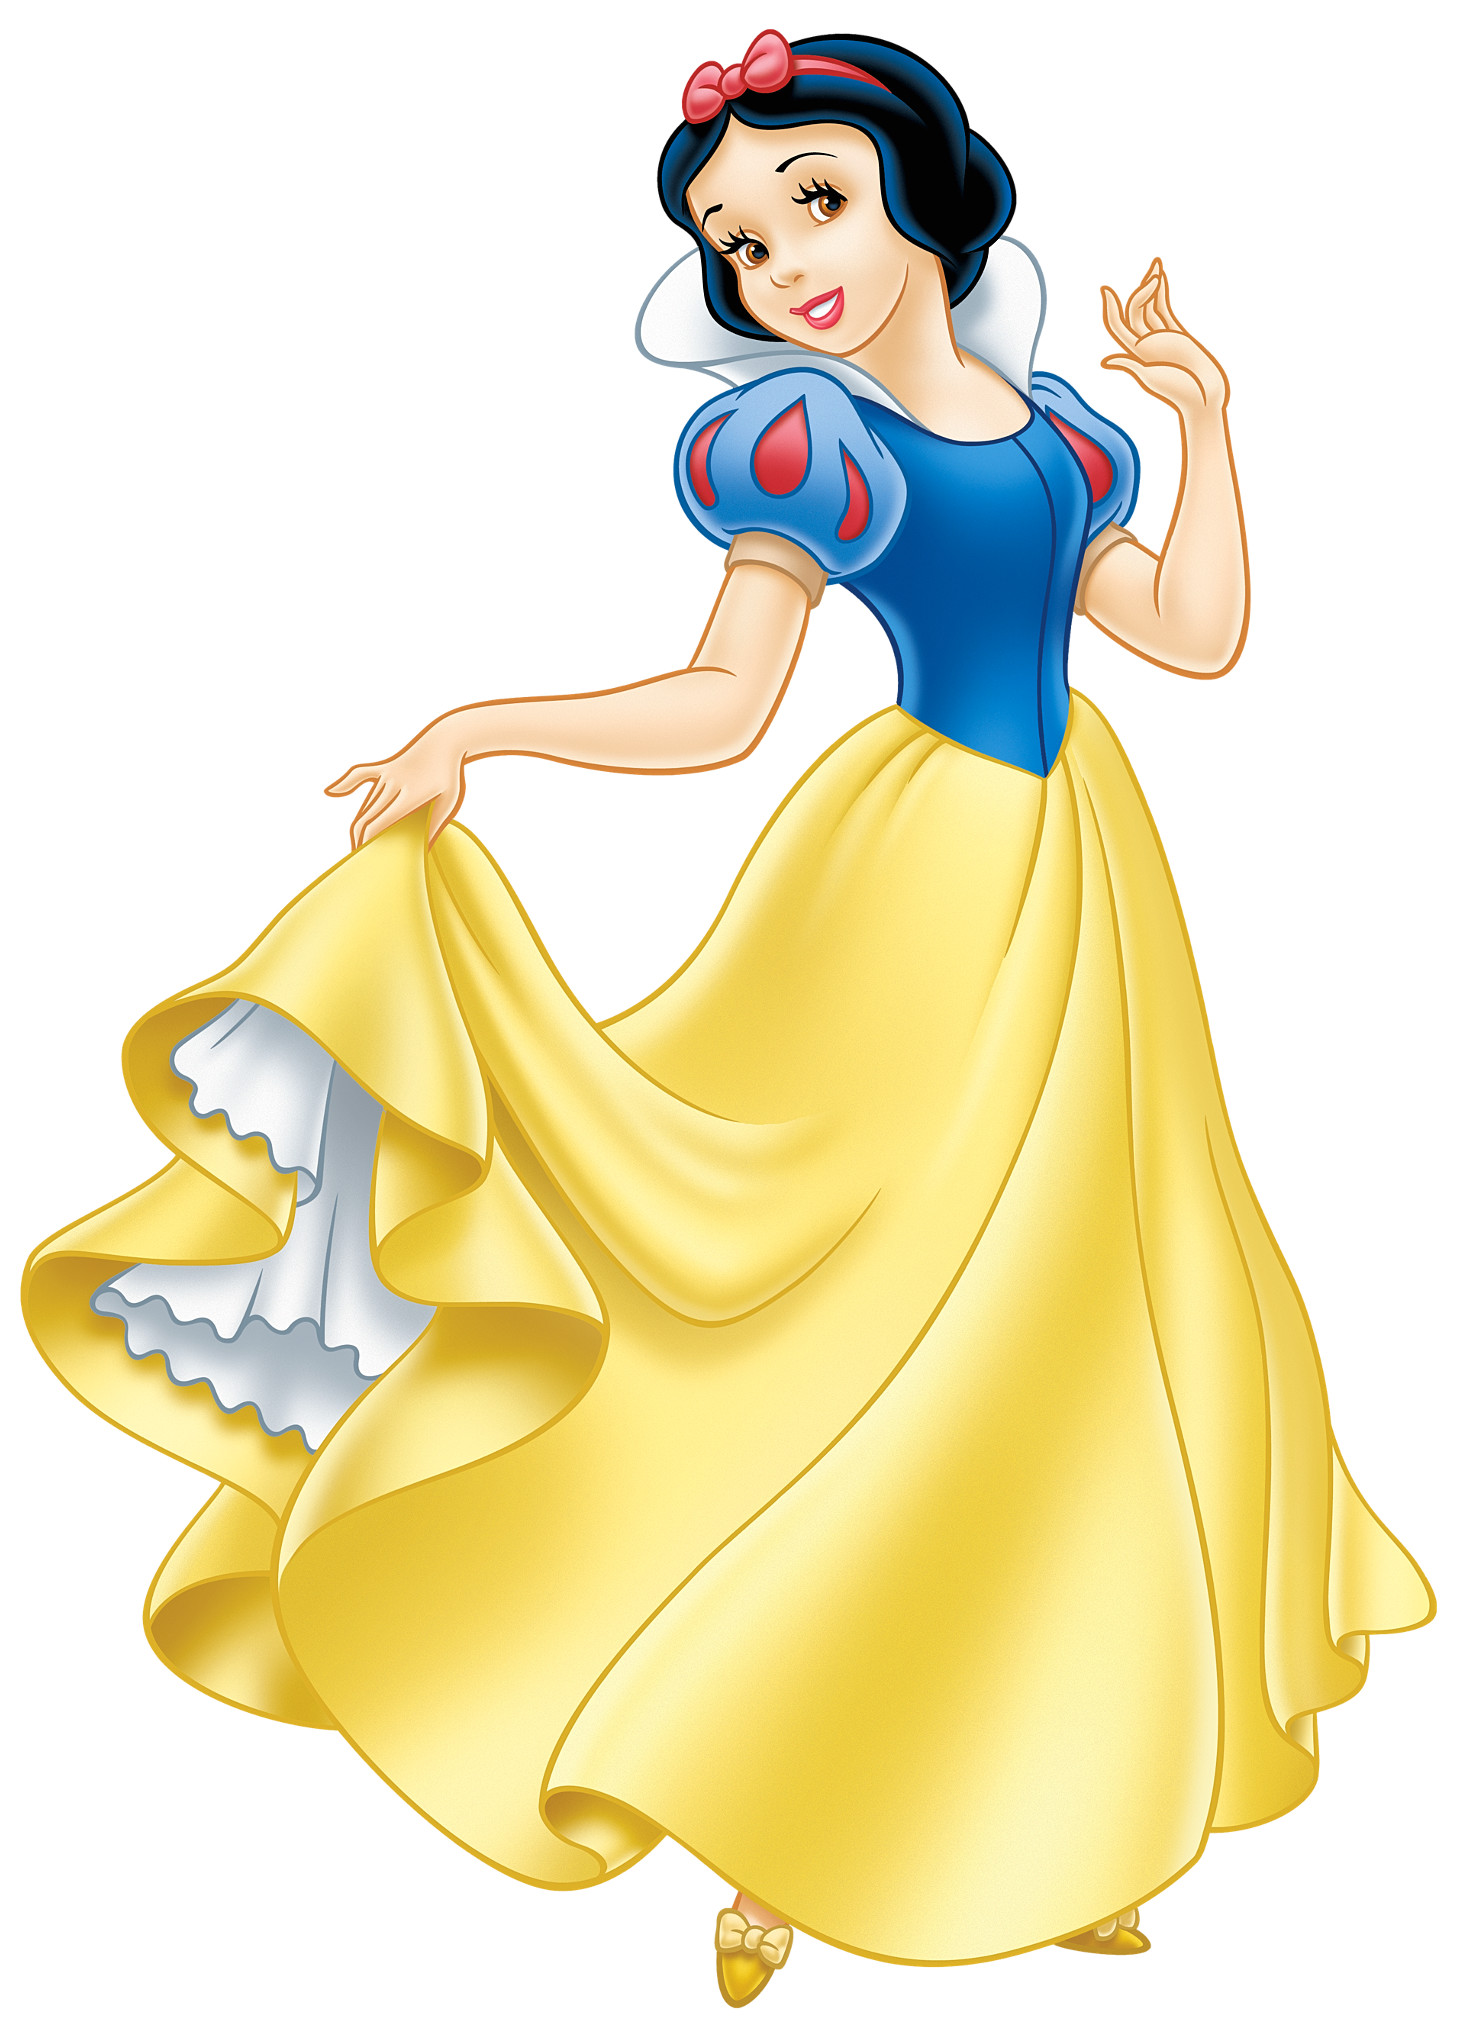 1476x2043 Princess Snow White from Disney's classic film “Snow White and the Seven  Dwarfs”. Wallpaper and background photos of Walt Disney Images - Princess  Snow ...